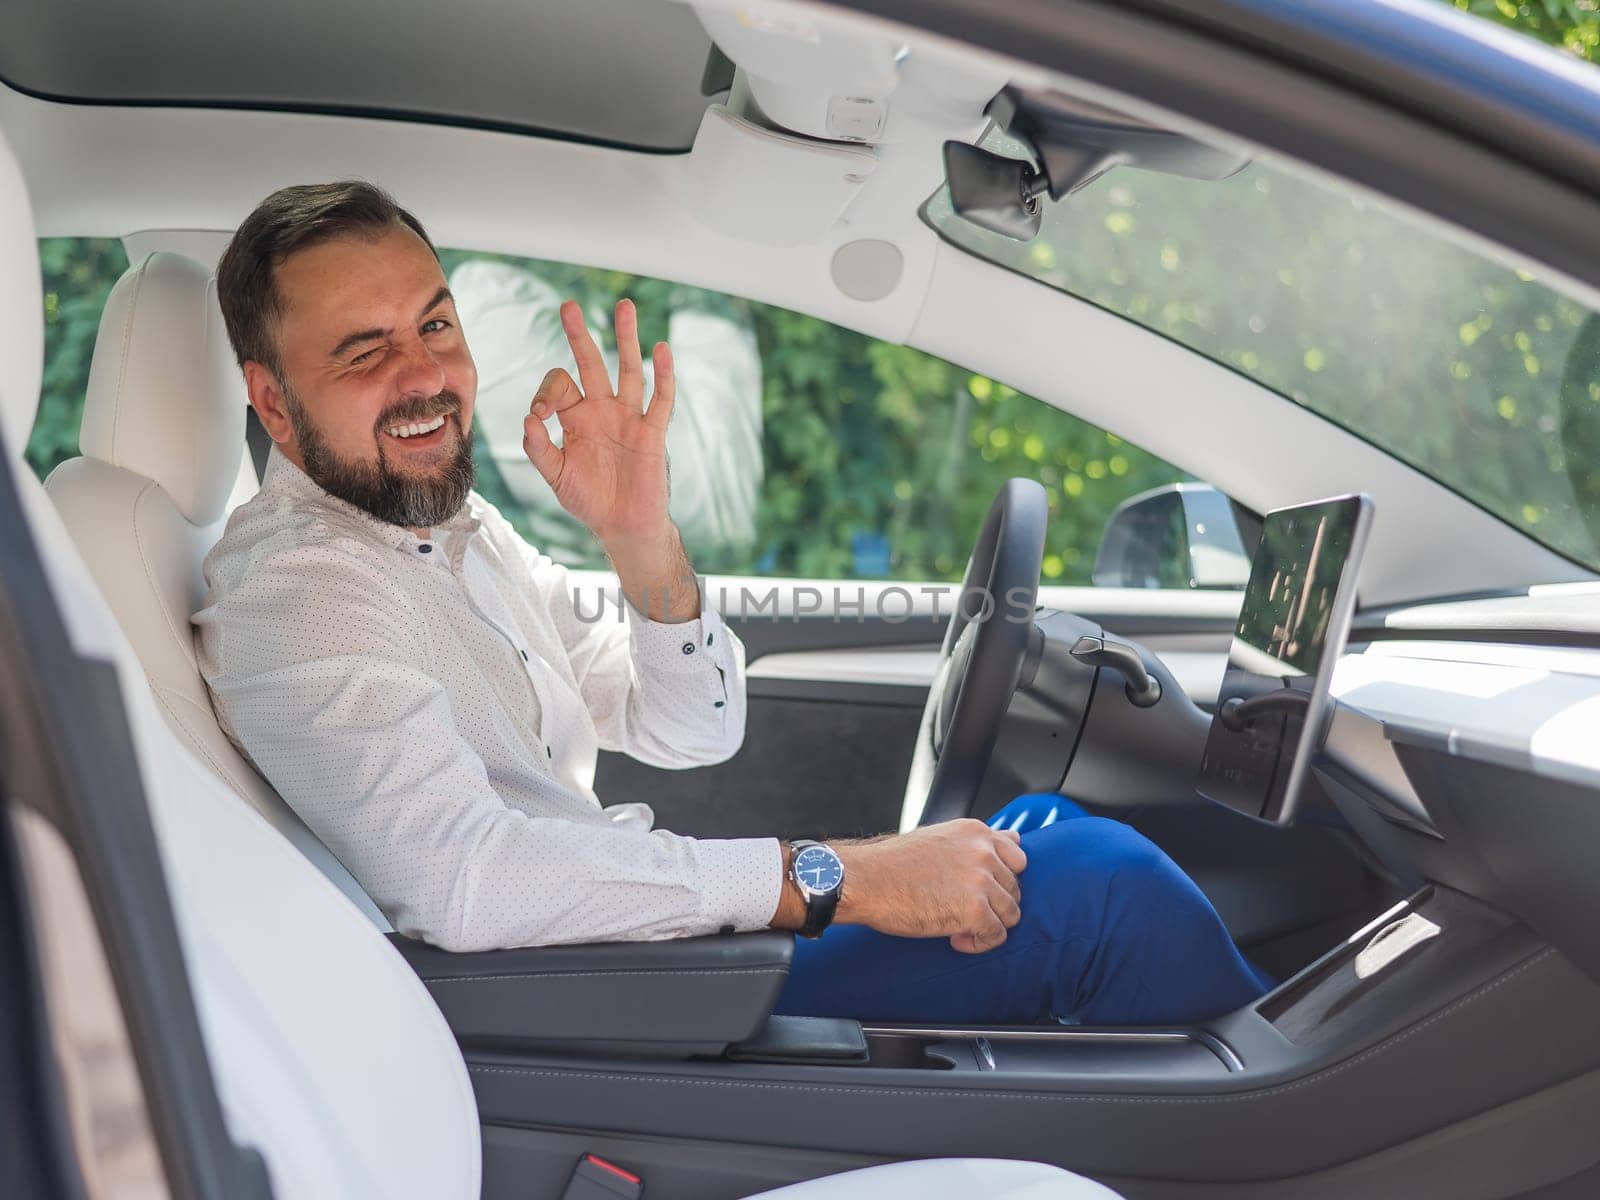 Caucasian bearded man in a suit driving a car shows an ok sign